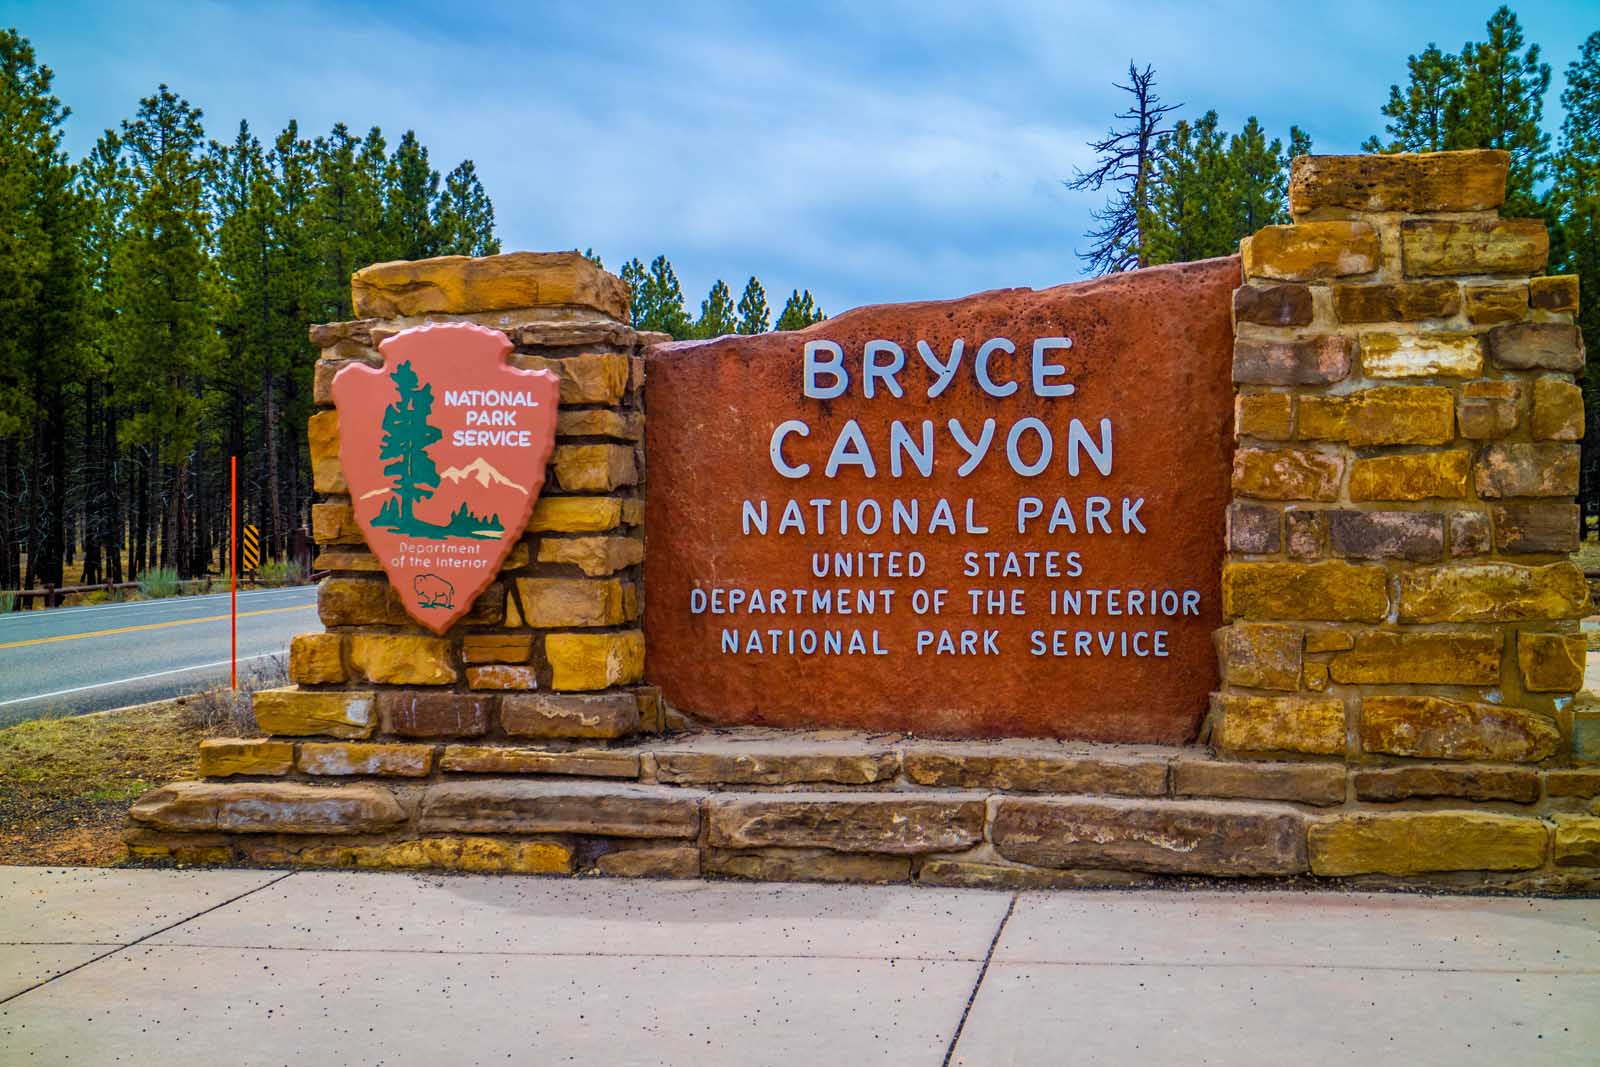 How to Get To Bryce Canyon National Park